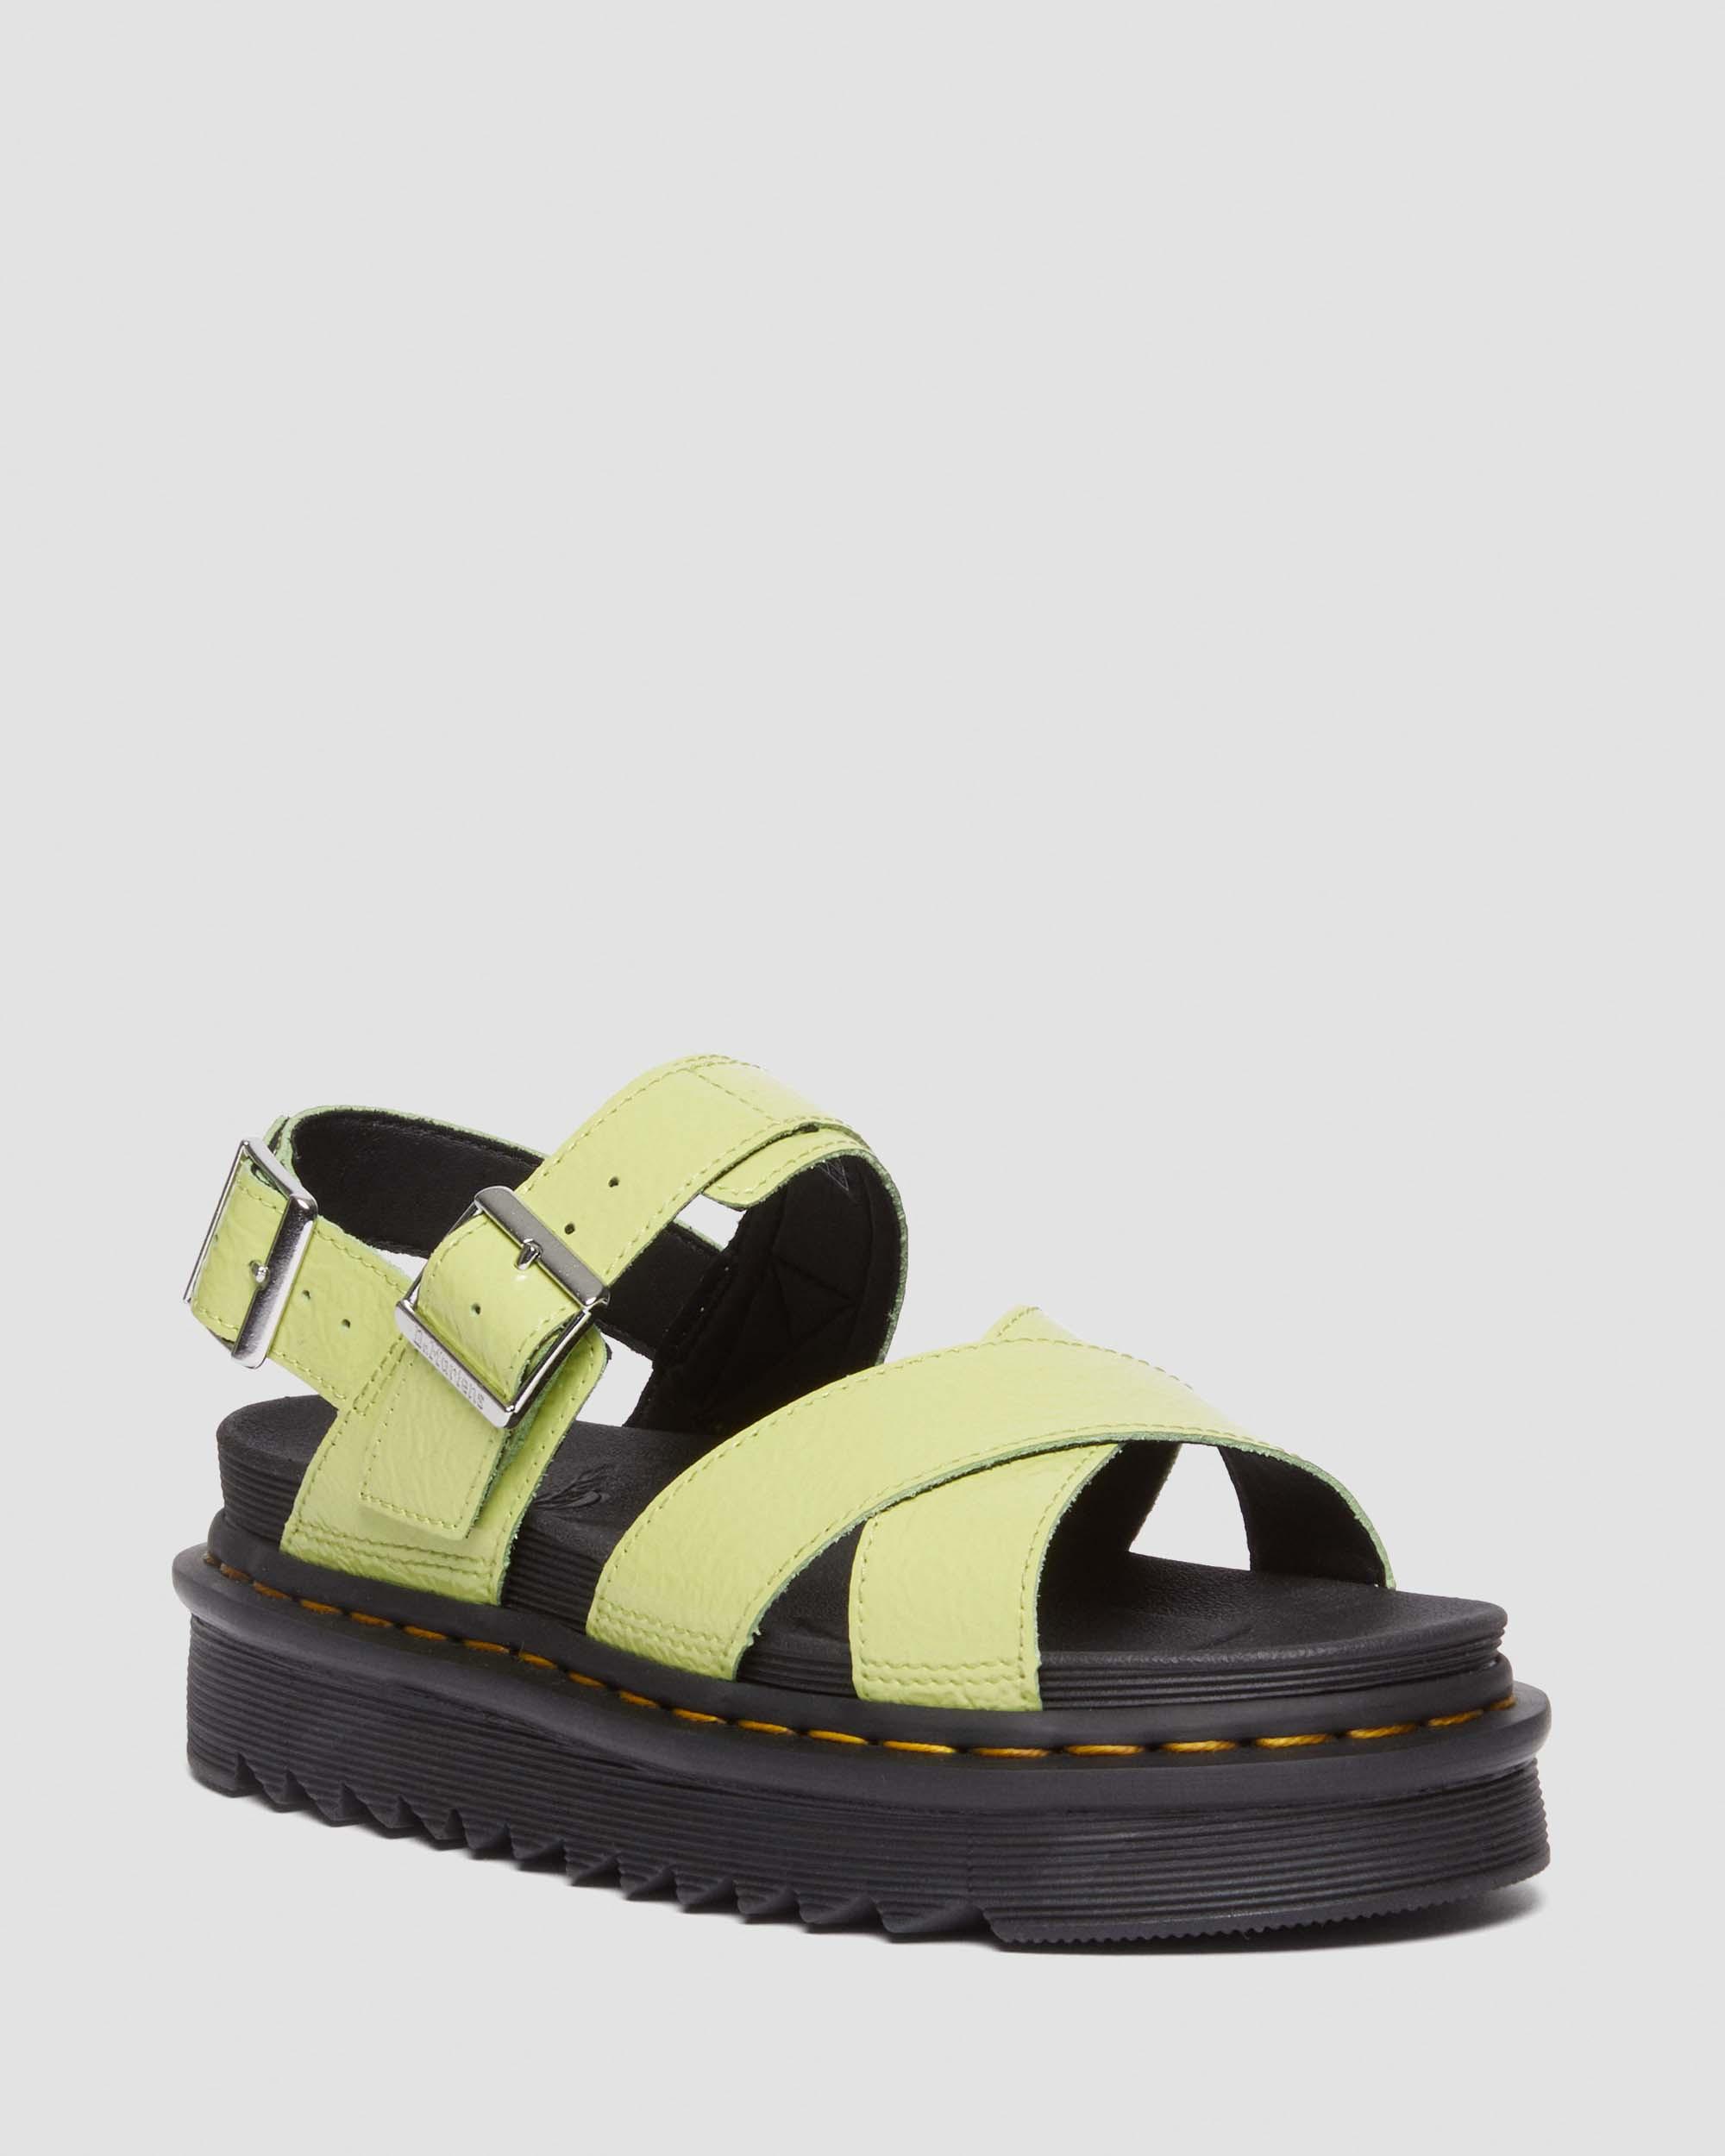 DR MARTENS Voss II Distressed Patent Leather Sandals